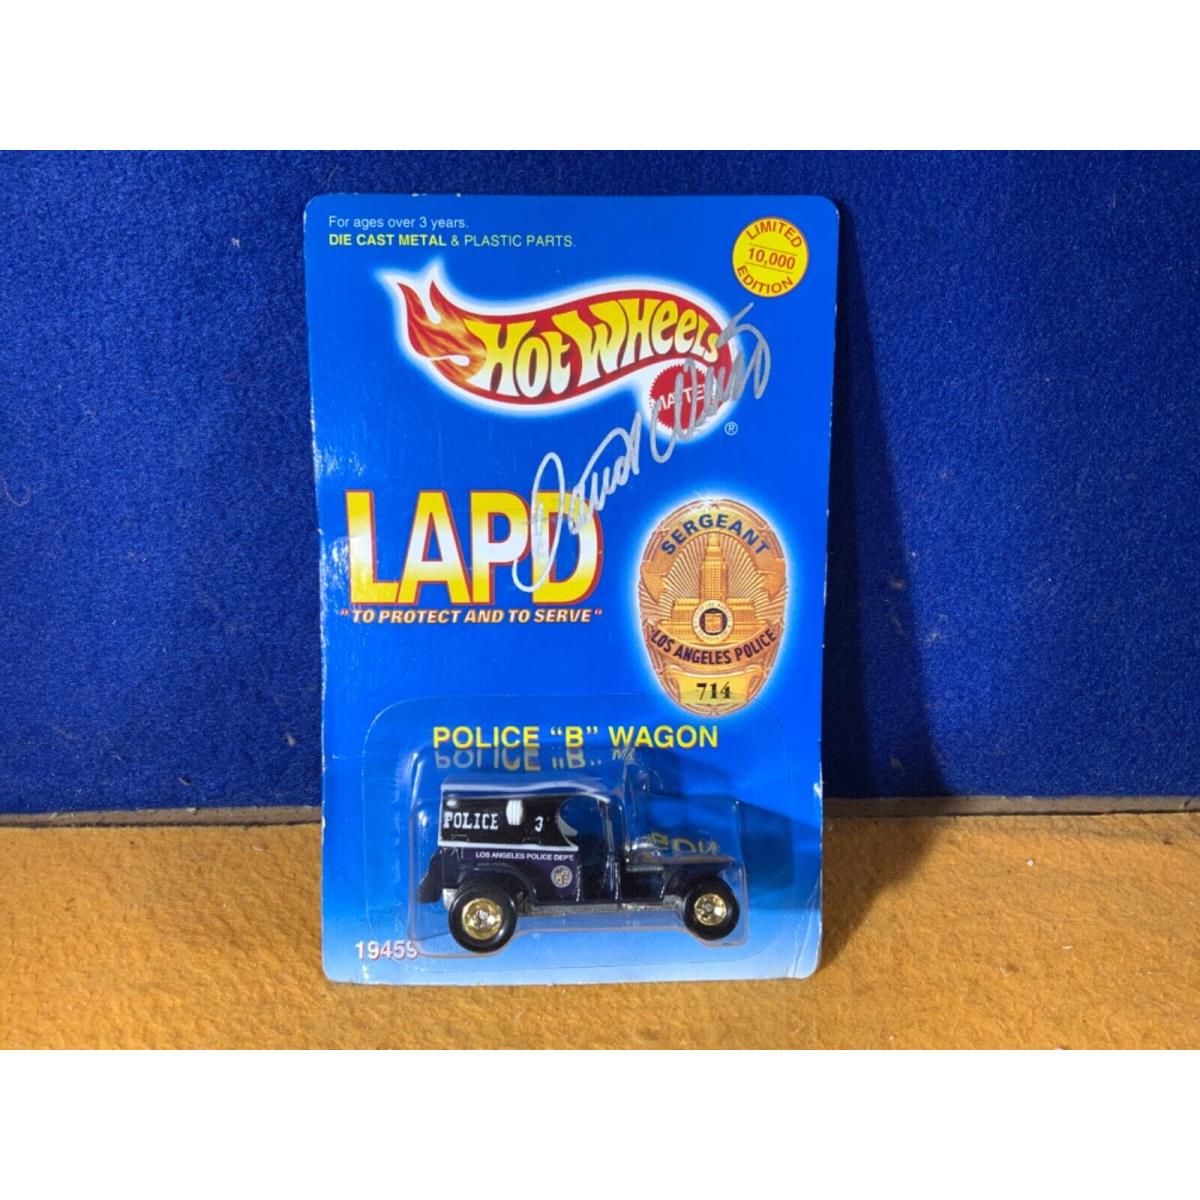 N9-69 Hot Wheels Lapd - Police B Wagon - Autographed David Weise